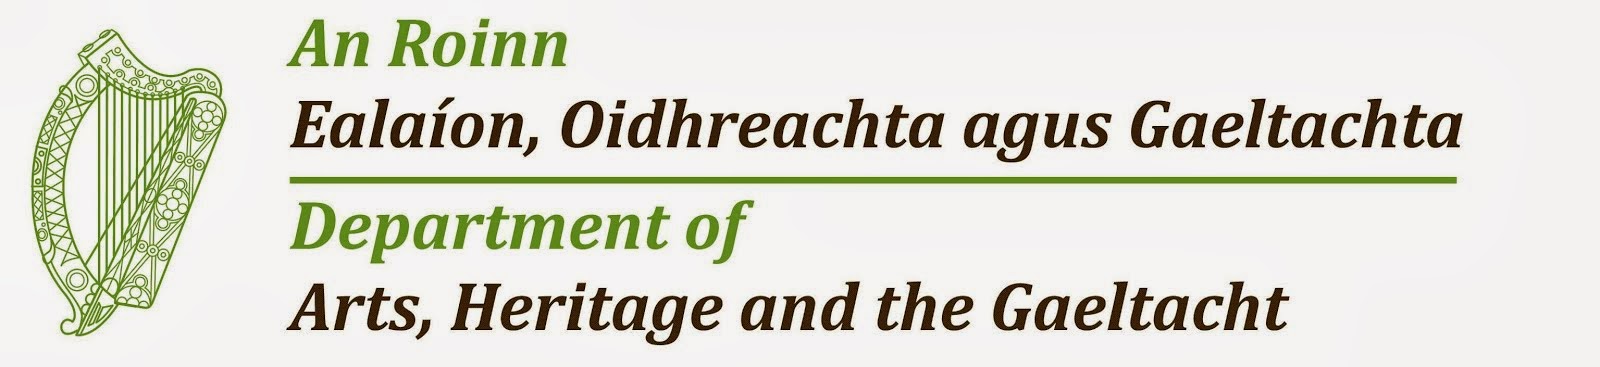 Dept. Arts, Heritage and Gaeltacht